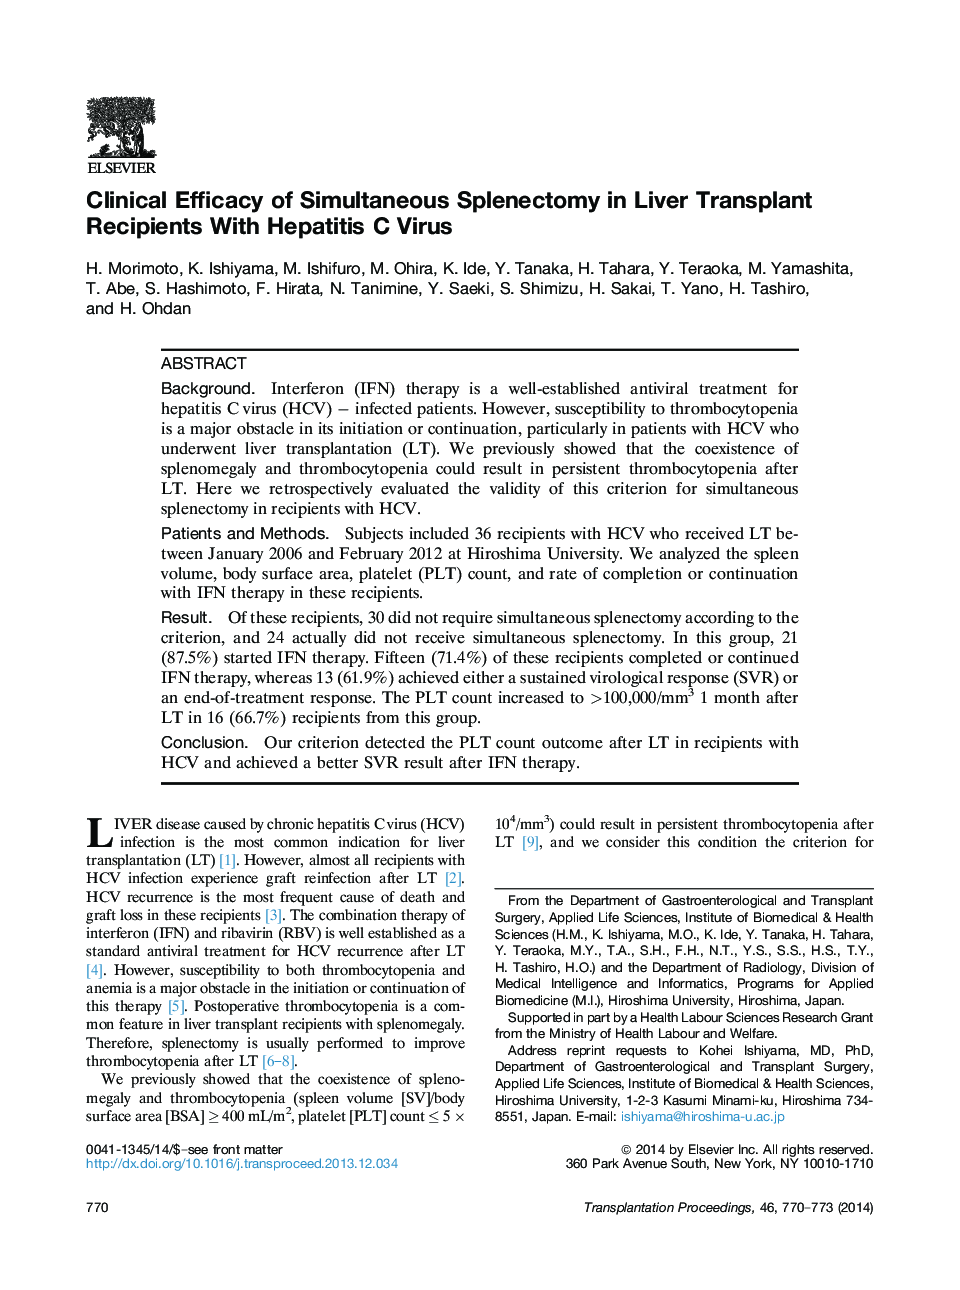 Clinical Efficacy of Simultaneous Splenectomy in Liver Transplant Recipients With Hepatitis C Virus 